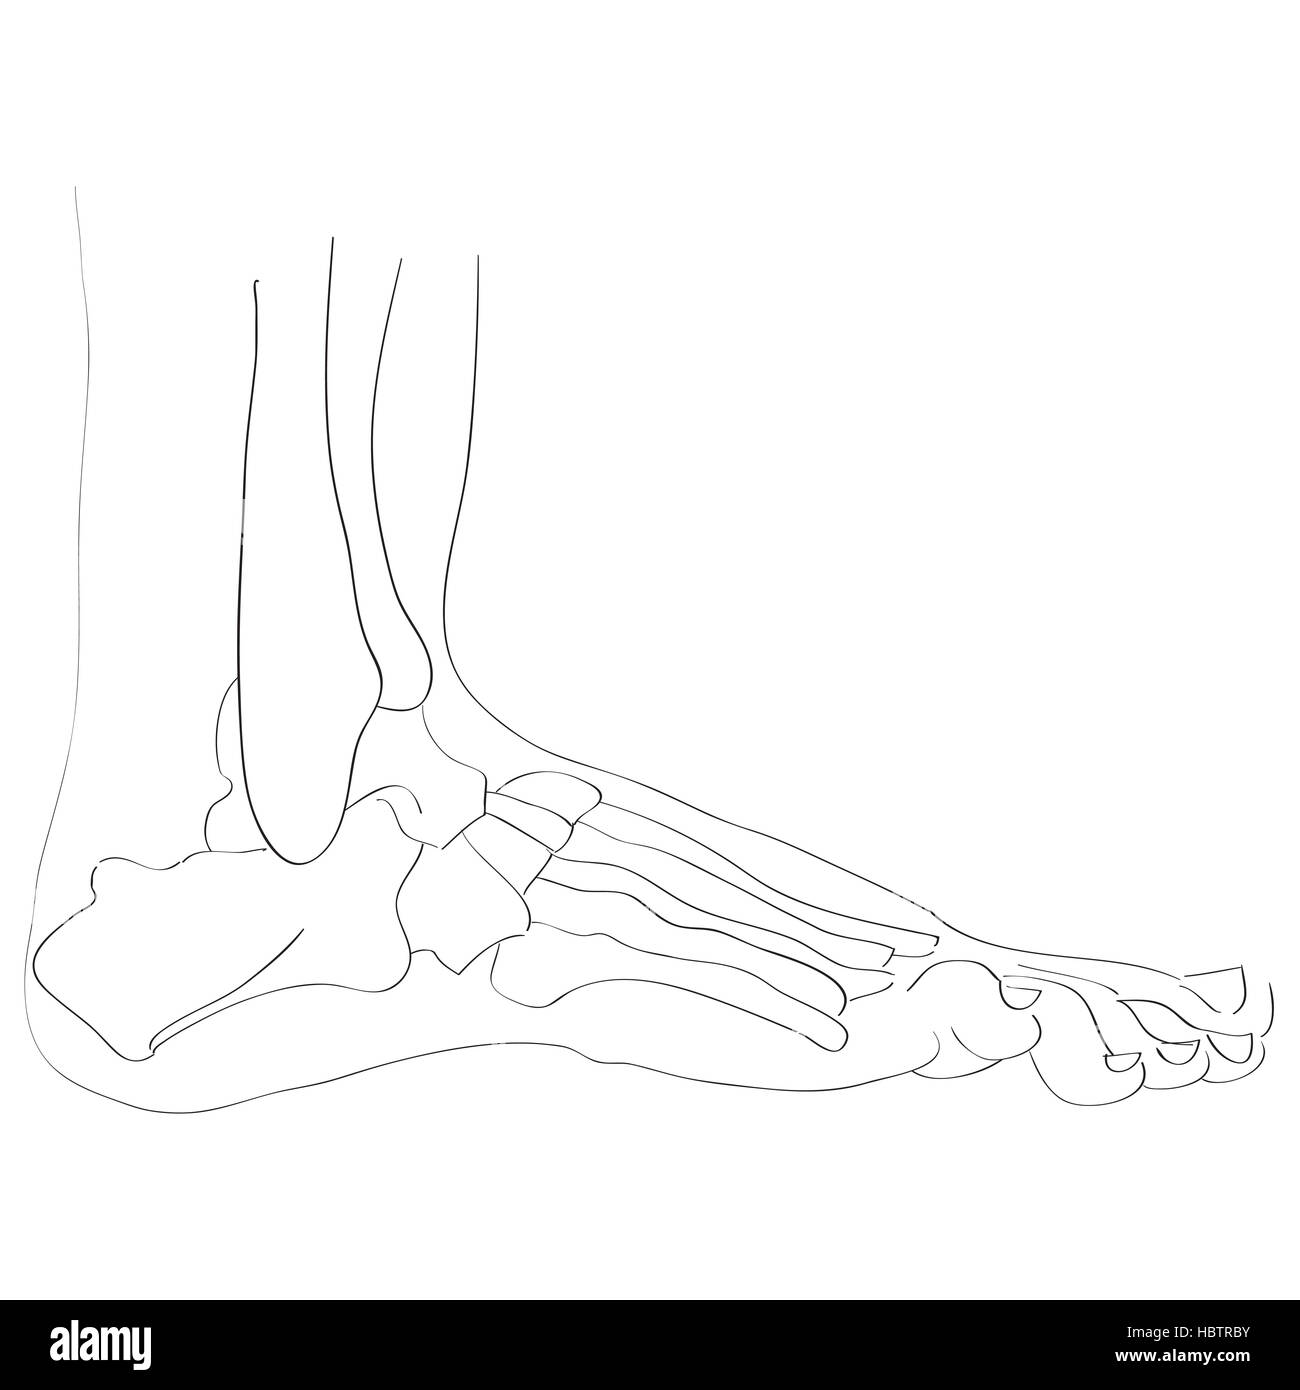 lateral view foot bones Stock Photo